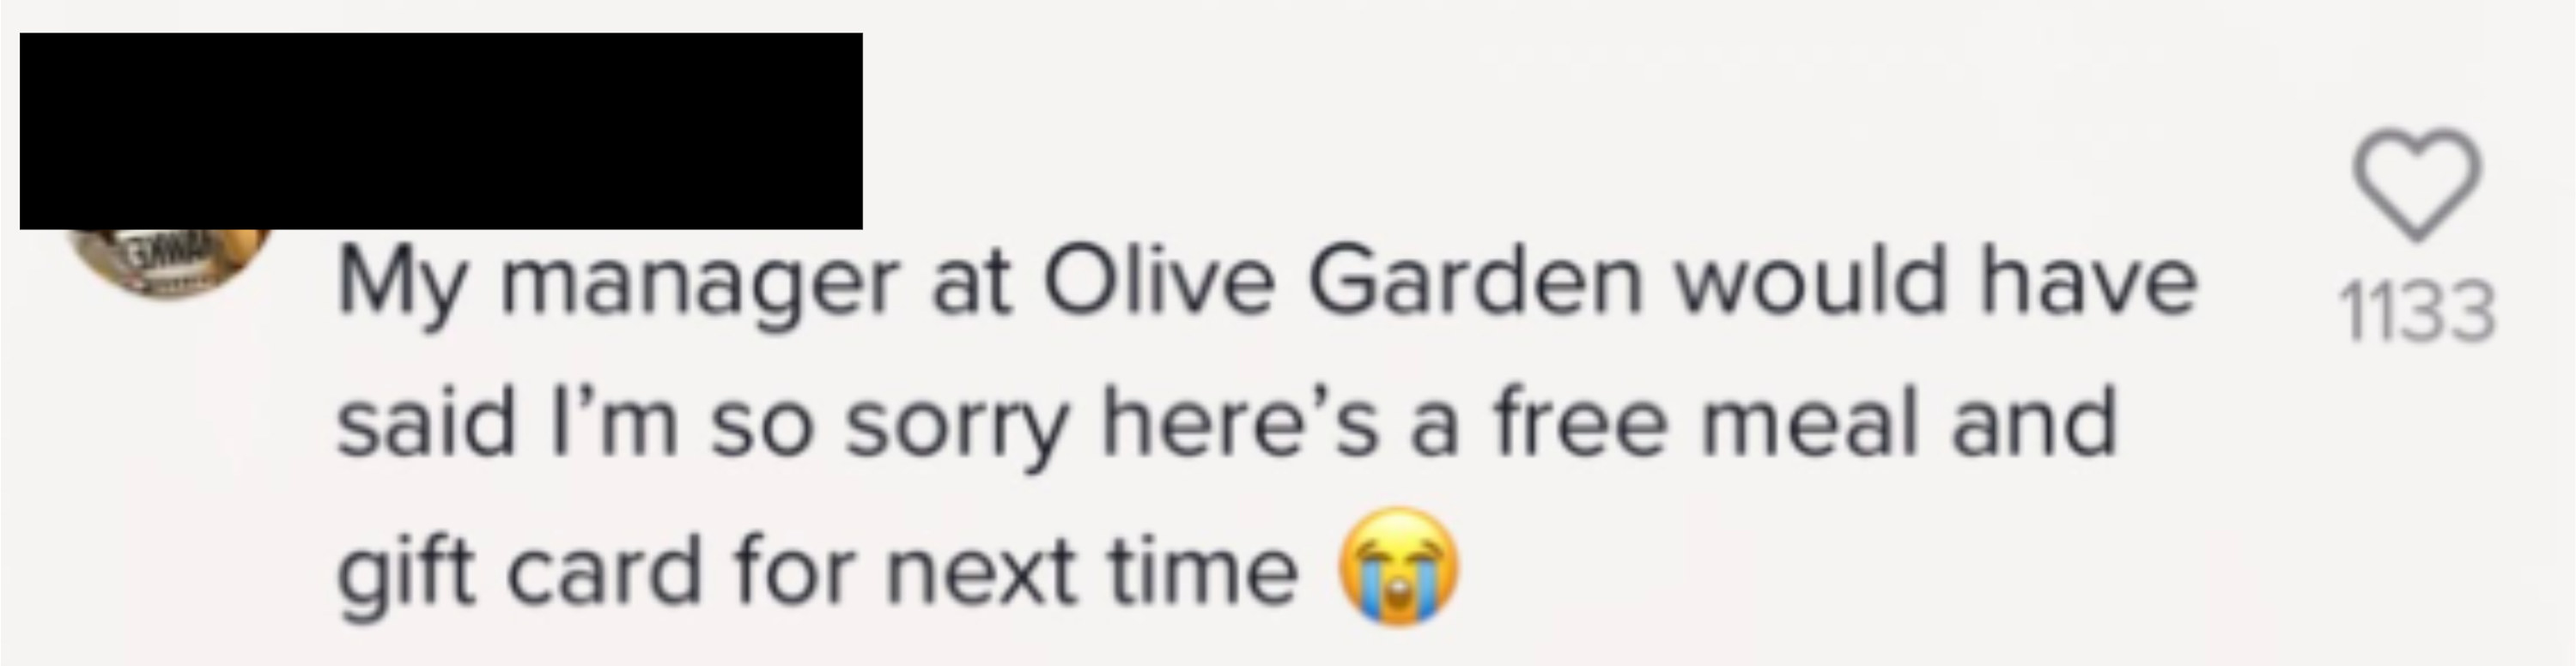 My manager at Olive Garden would have said &quot;I&#x27;m so sorry here&#x27;s a free meal and gift card for next time&quot;